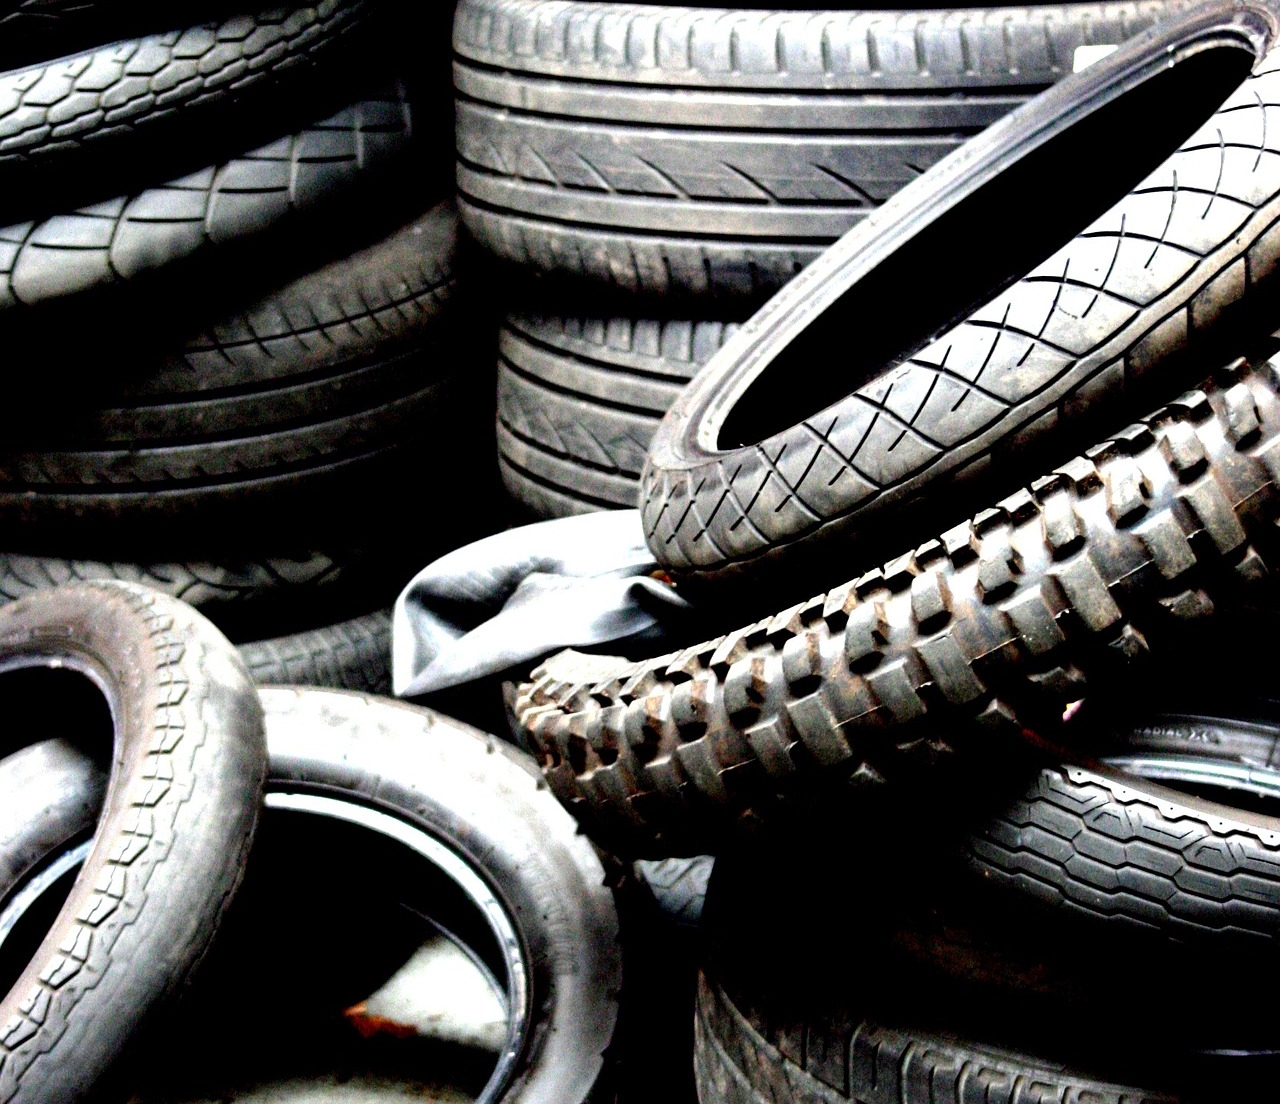 TRA: India’s end-of-life tyre recycling mandate a welcome move